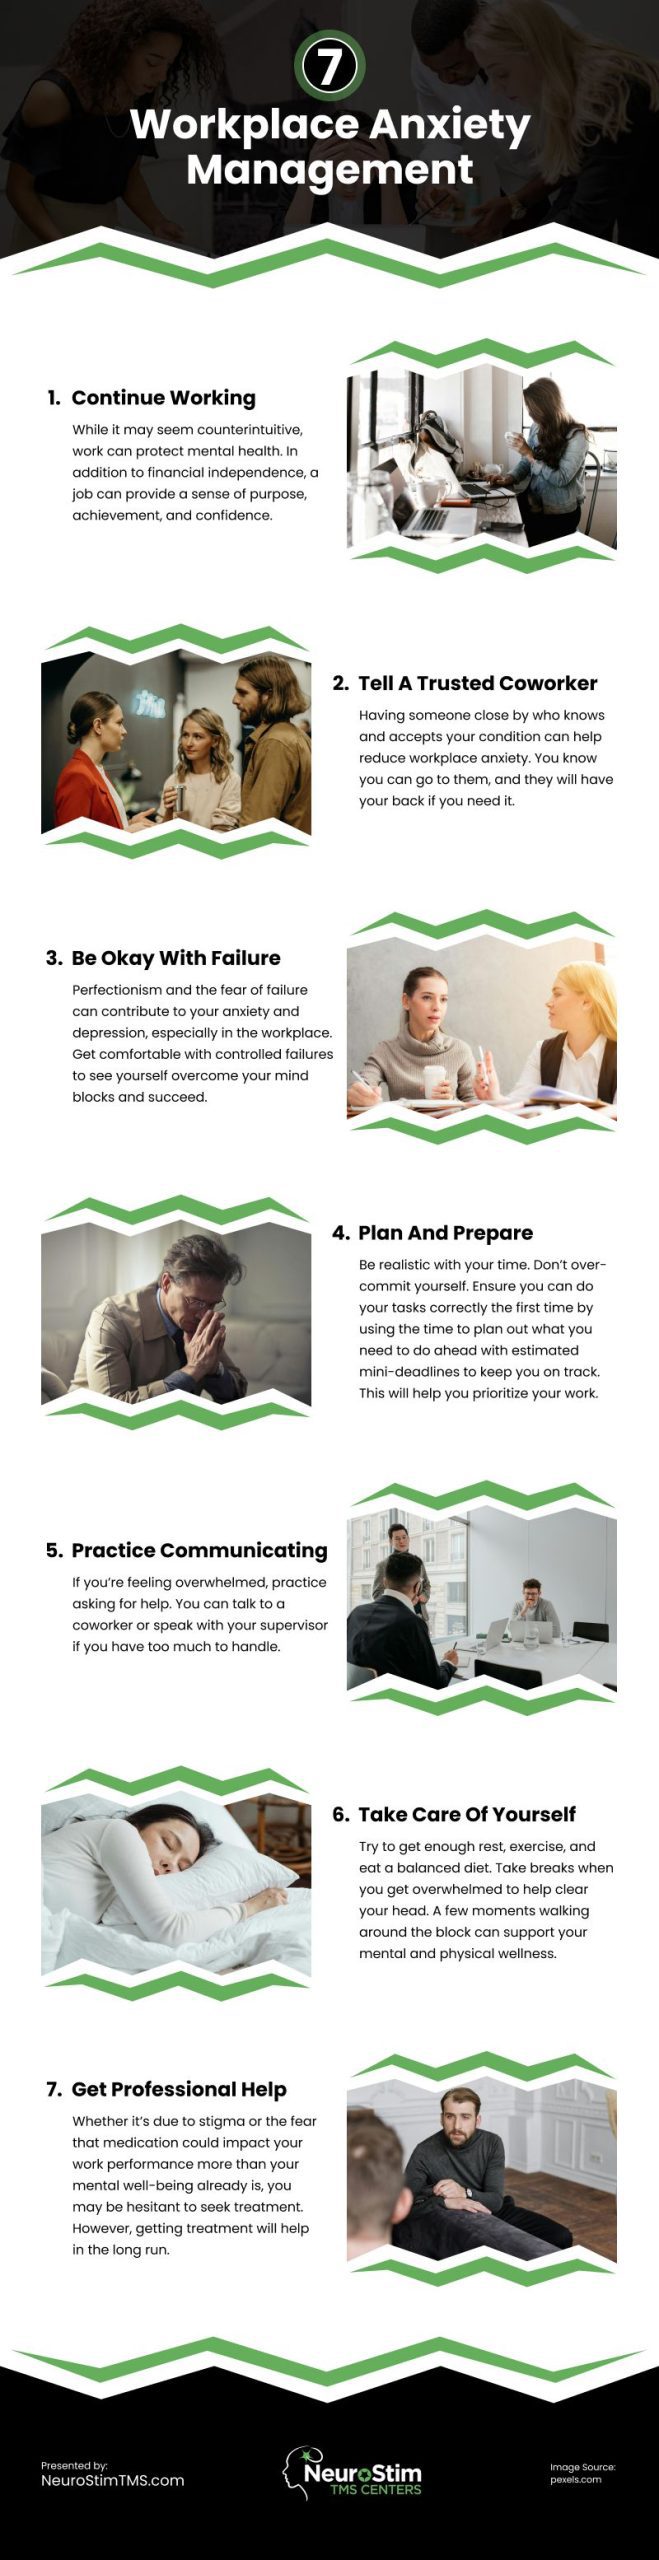 7 Workplace Anxiety Management Infographic